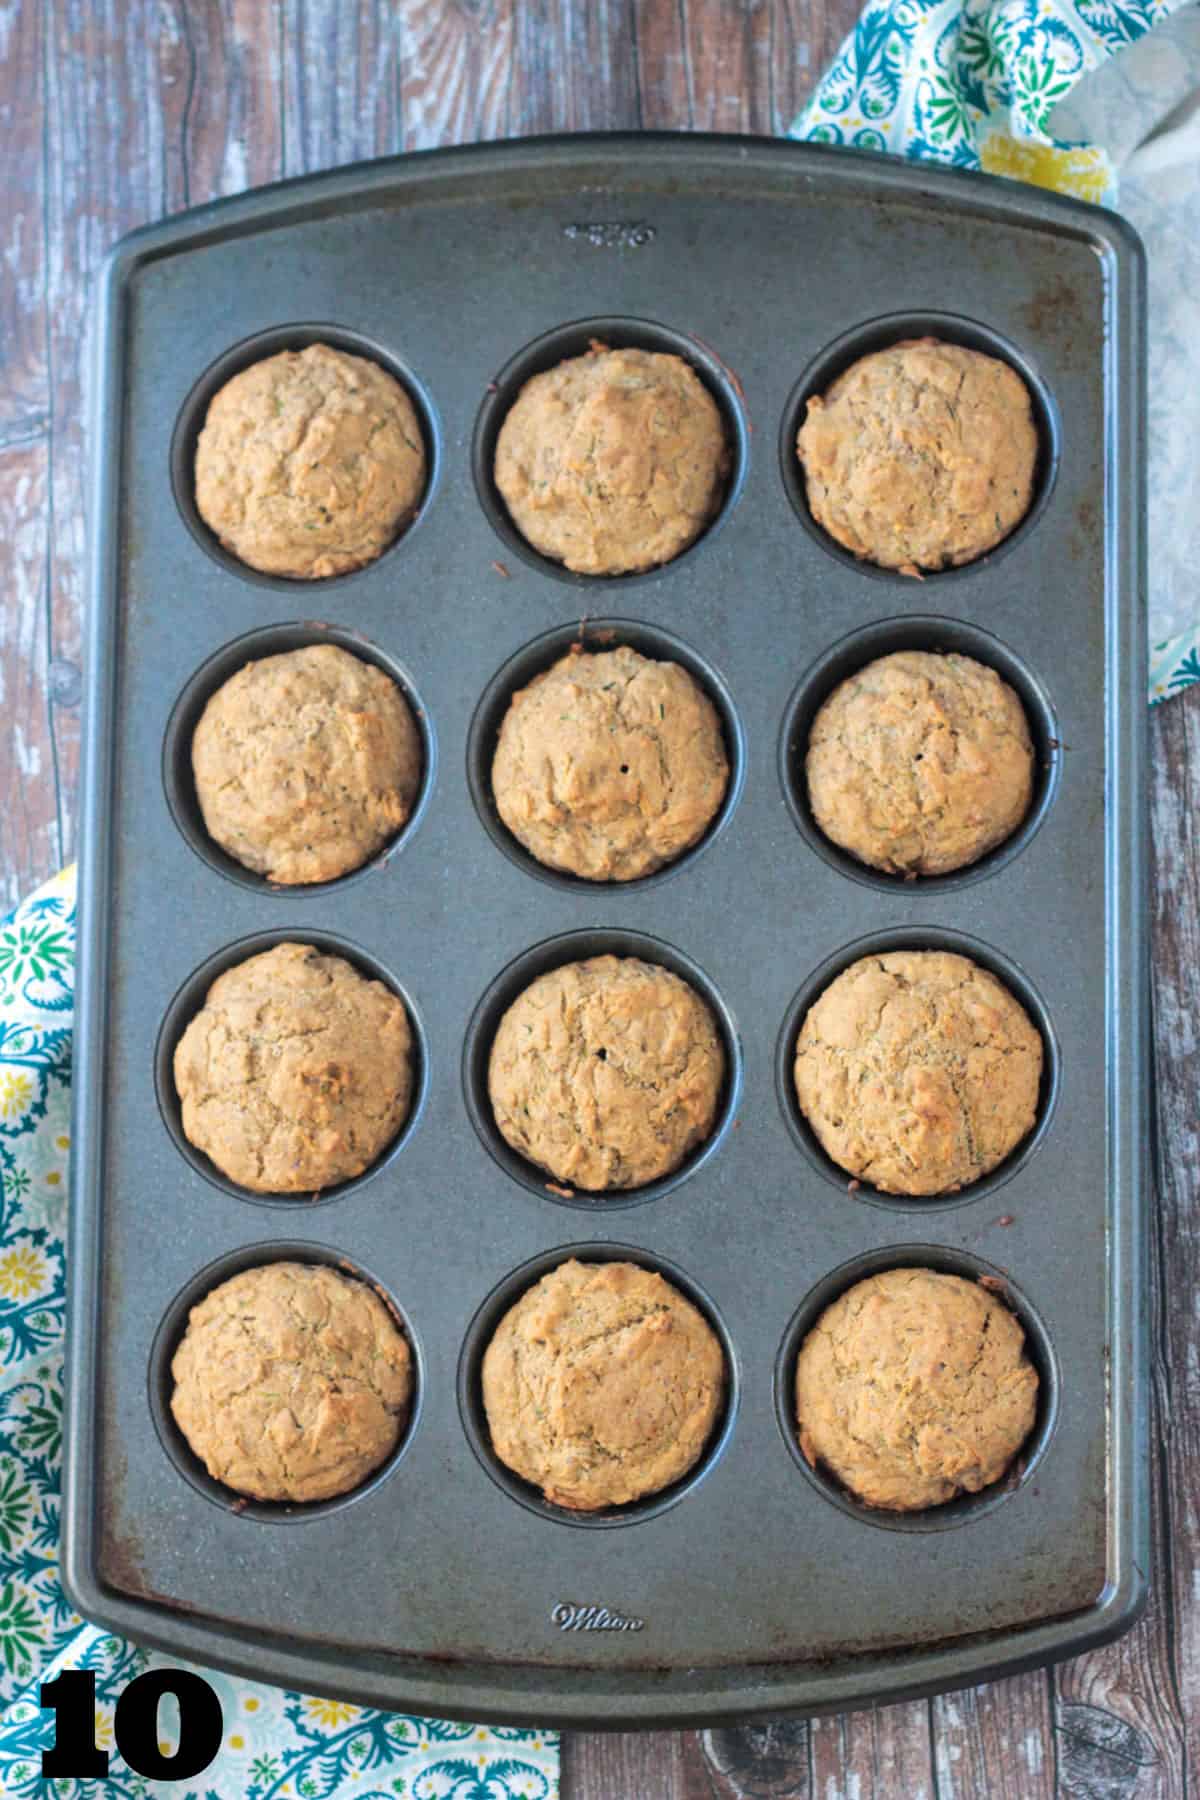 Freshly baked zucchini muffins in the pan.